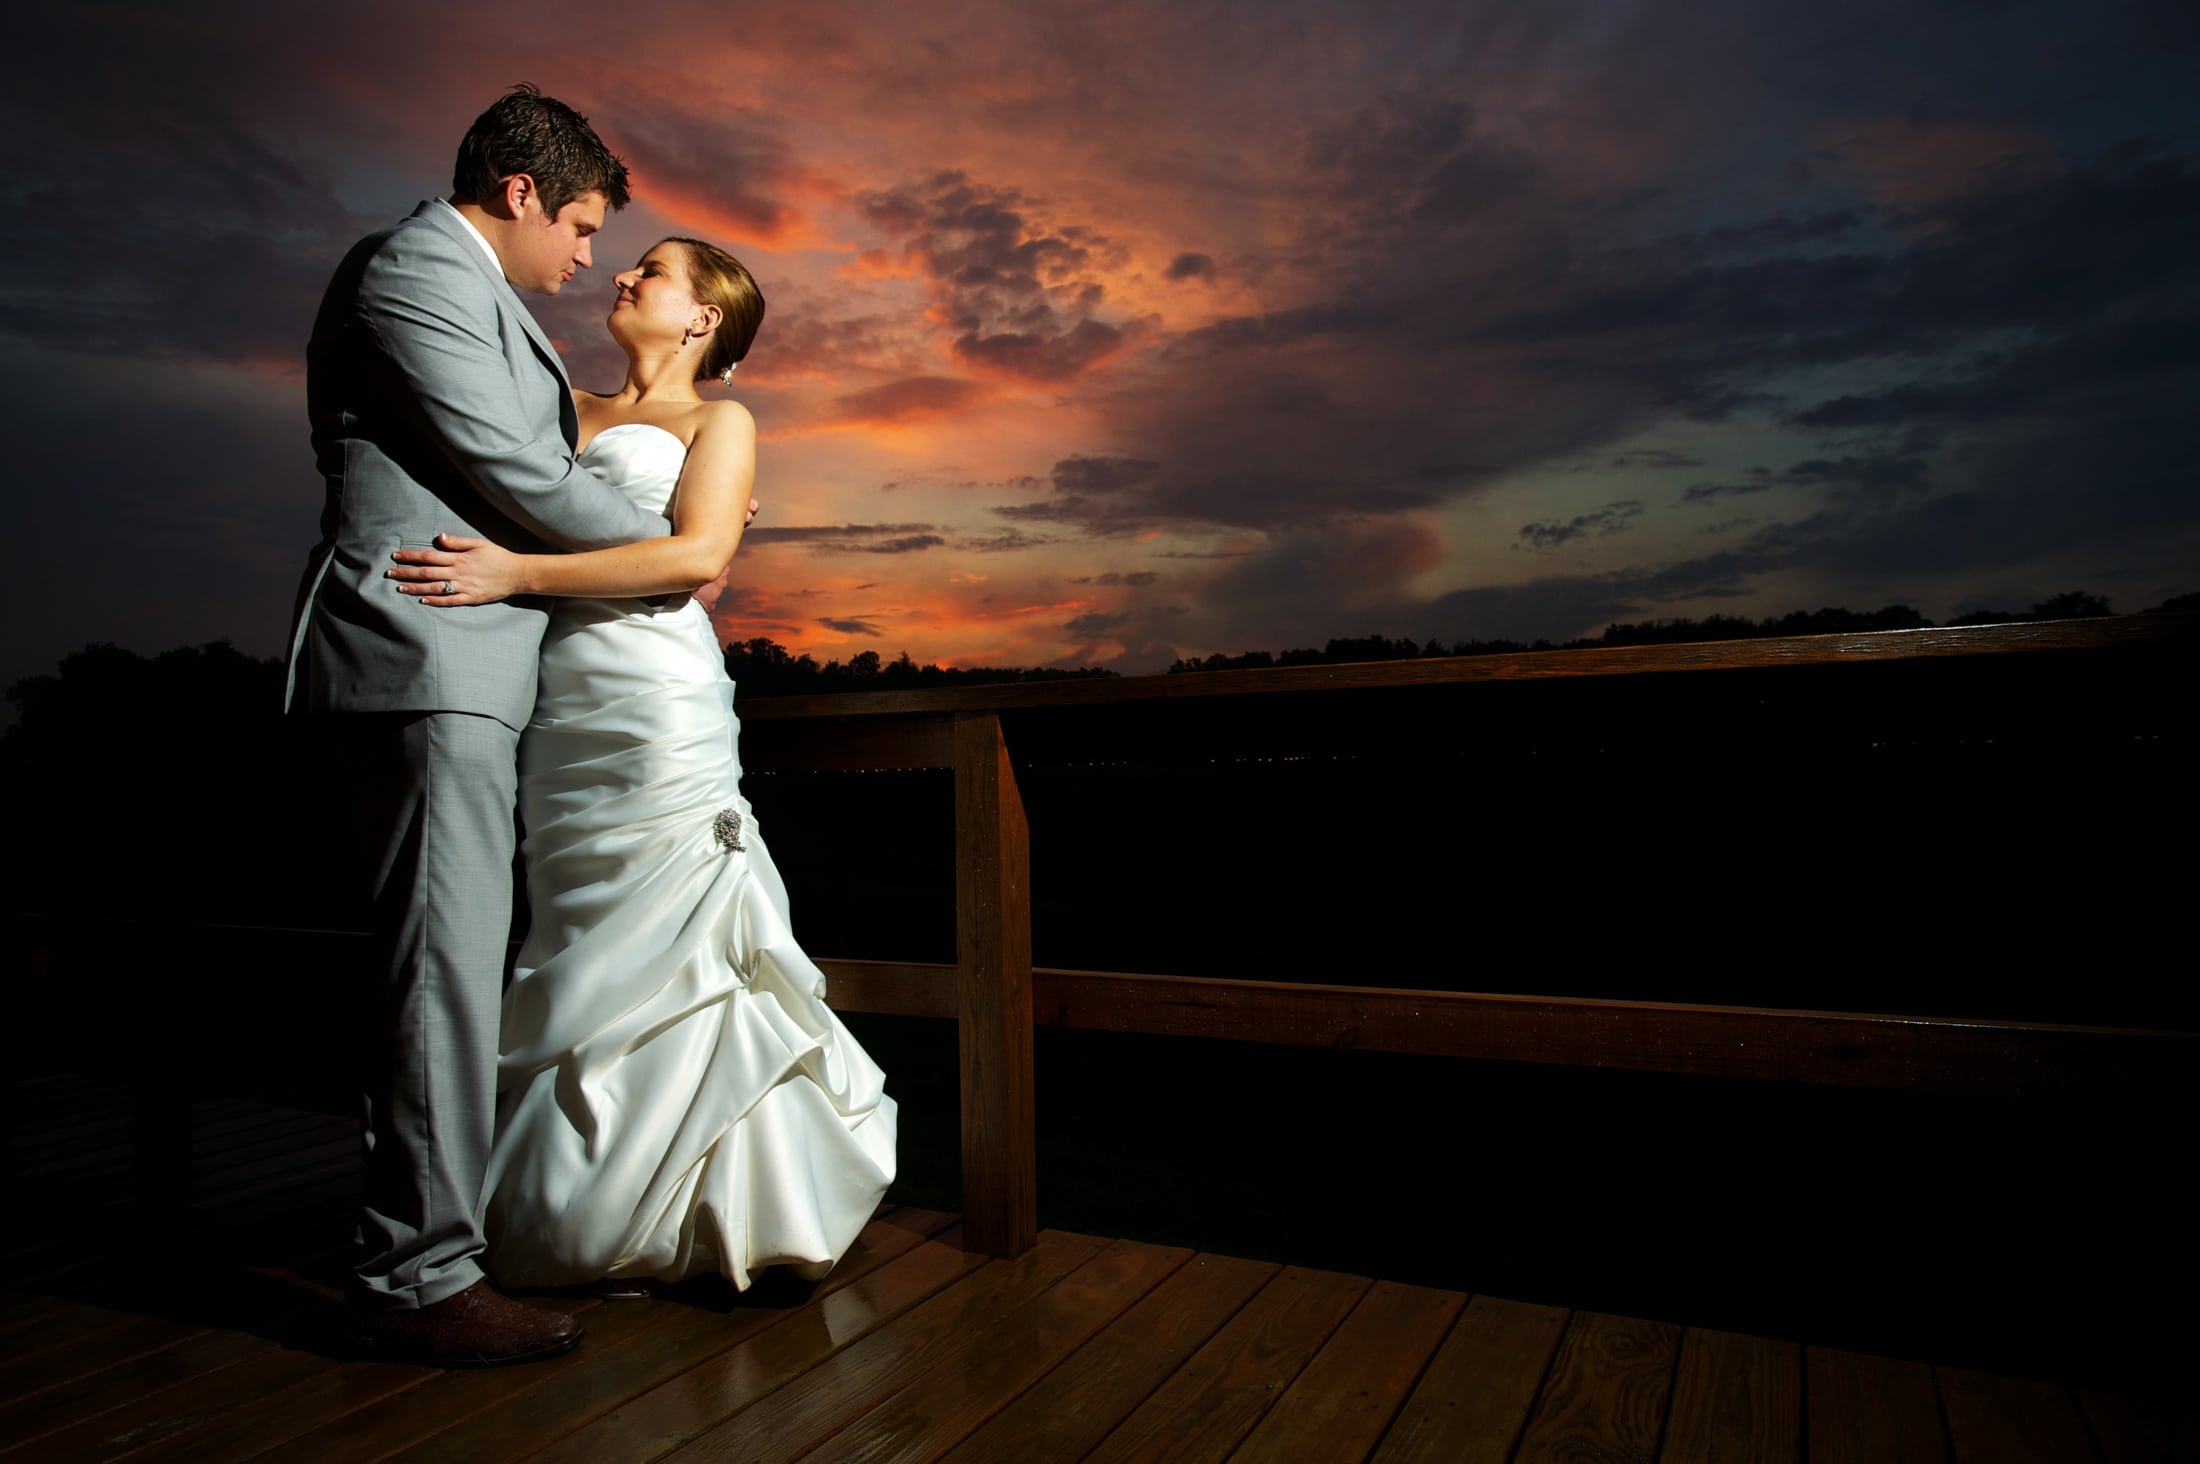 A bride and groom hold each other in front of a dramatic sunset.